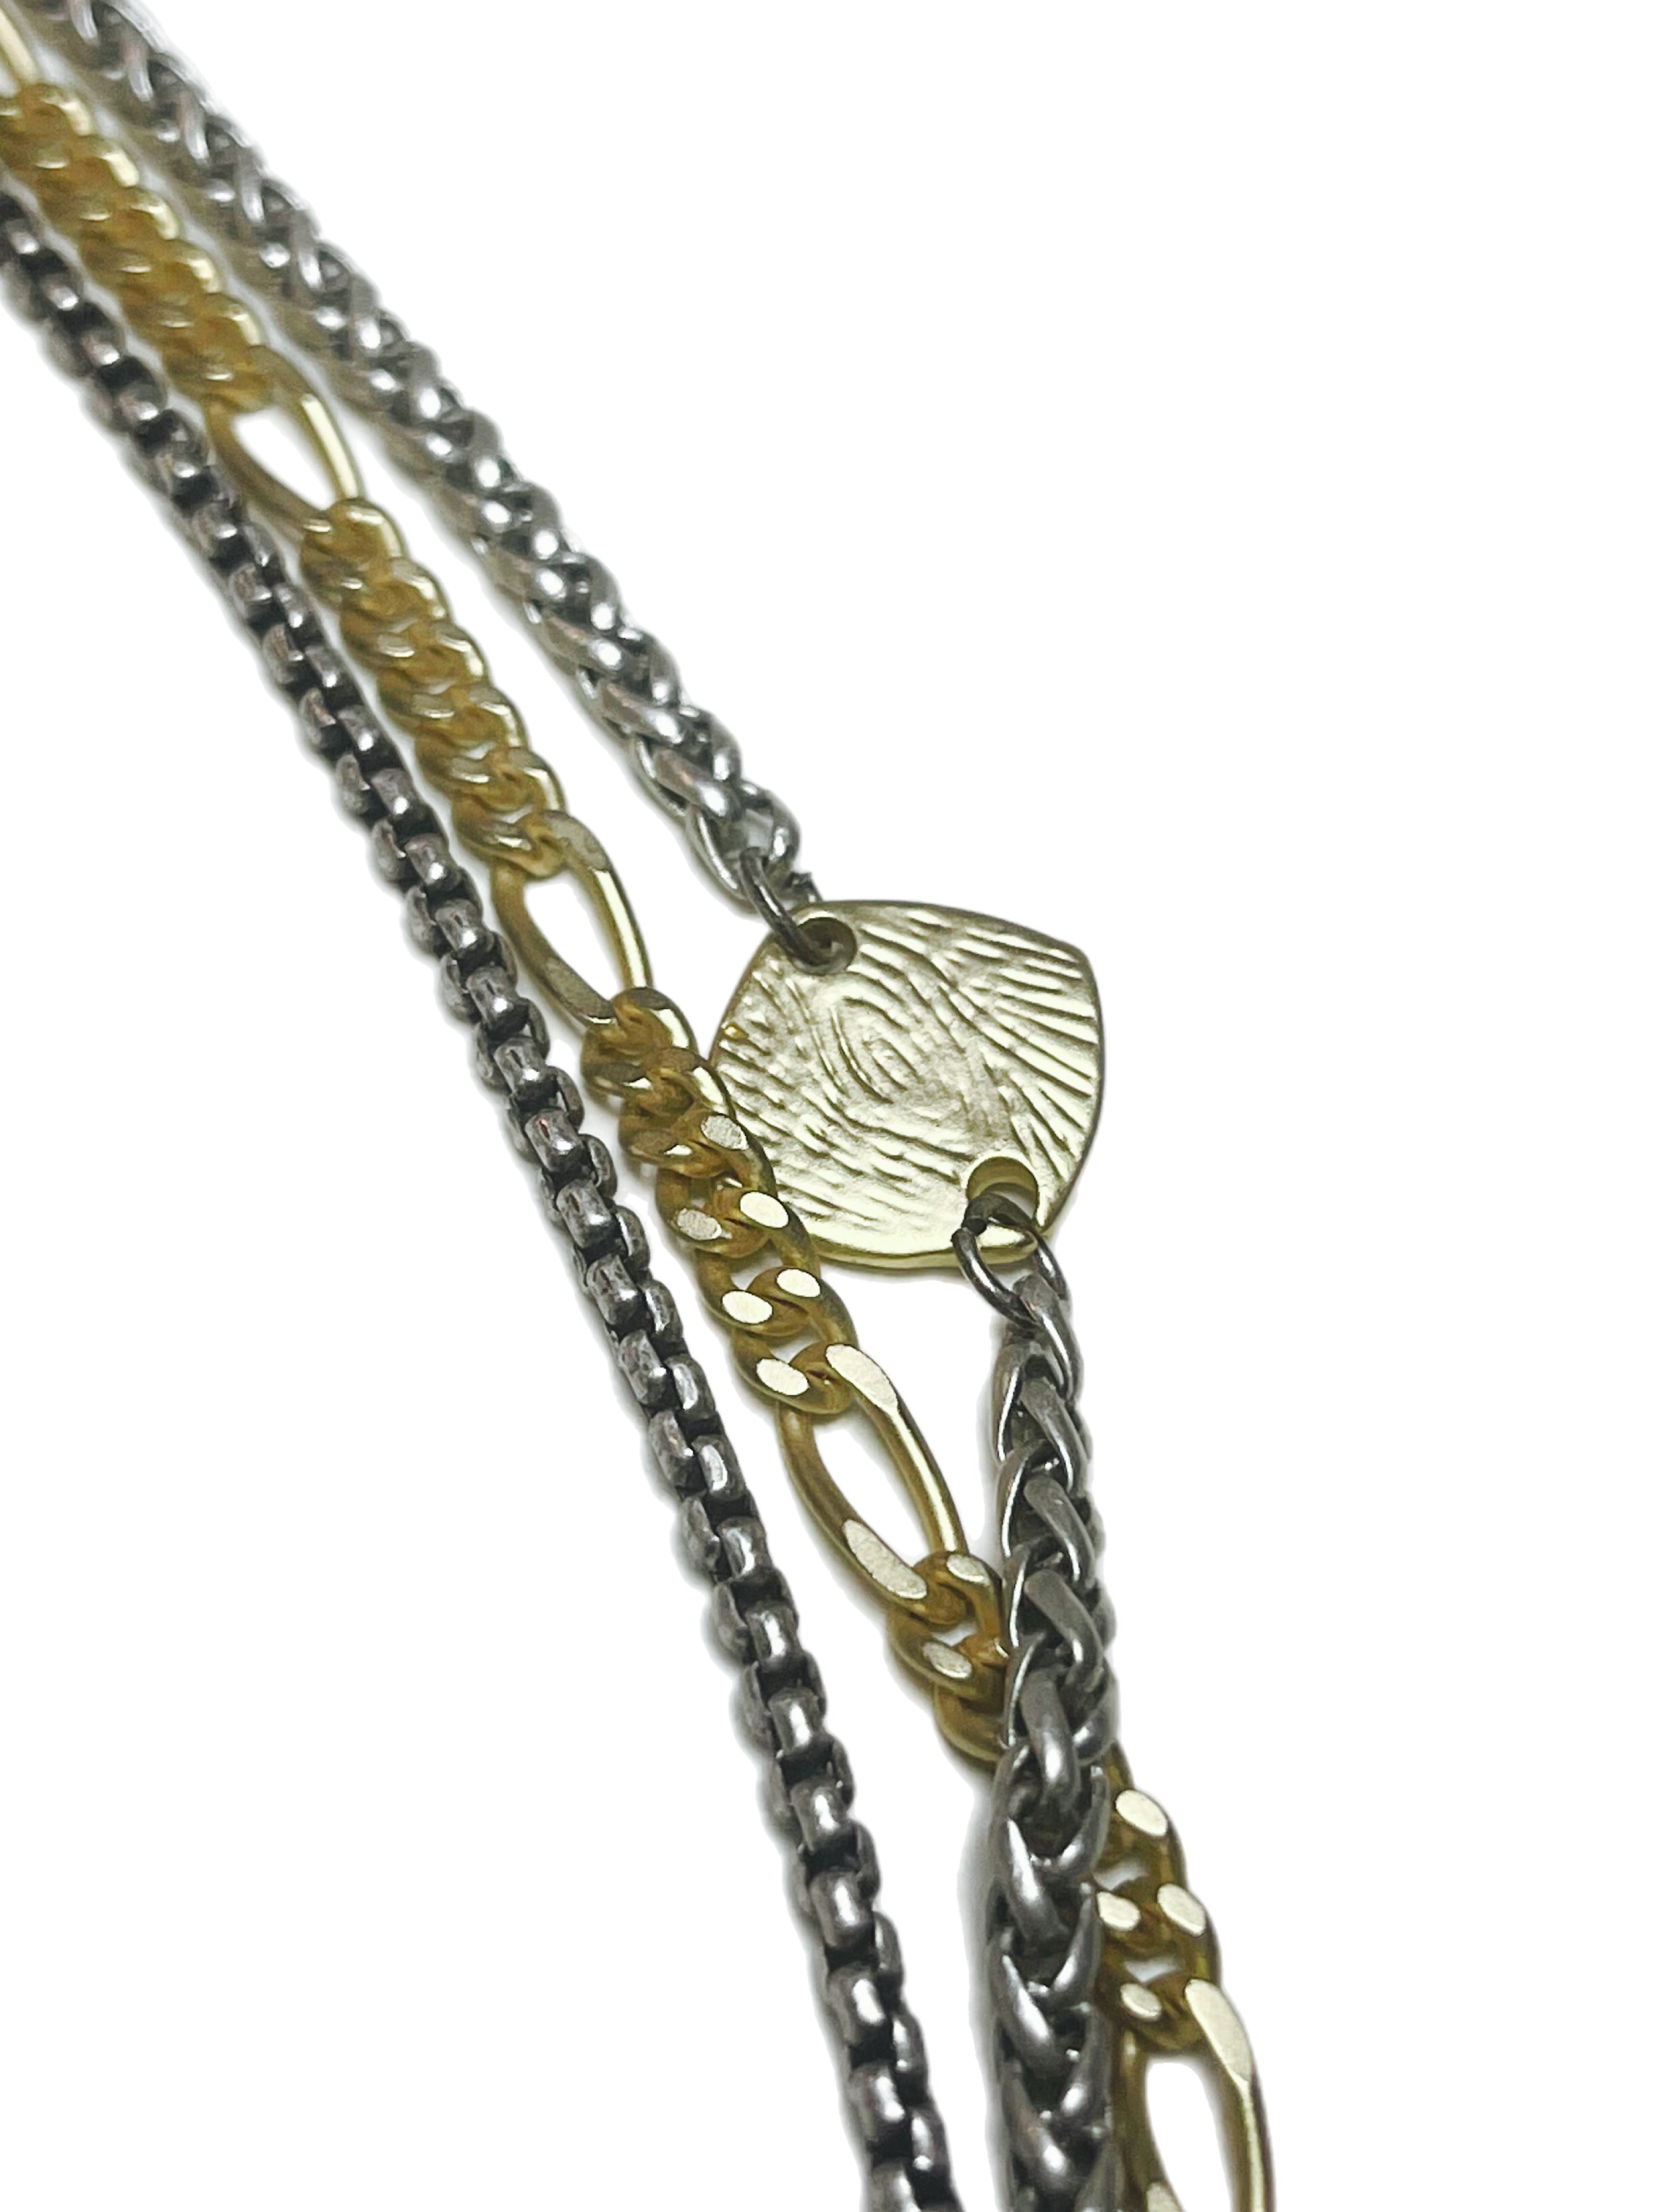 Joce - necklace of mixed metal chains with etched gold accent